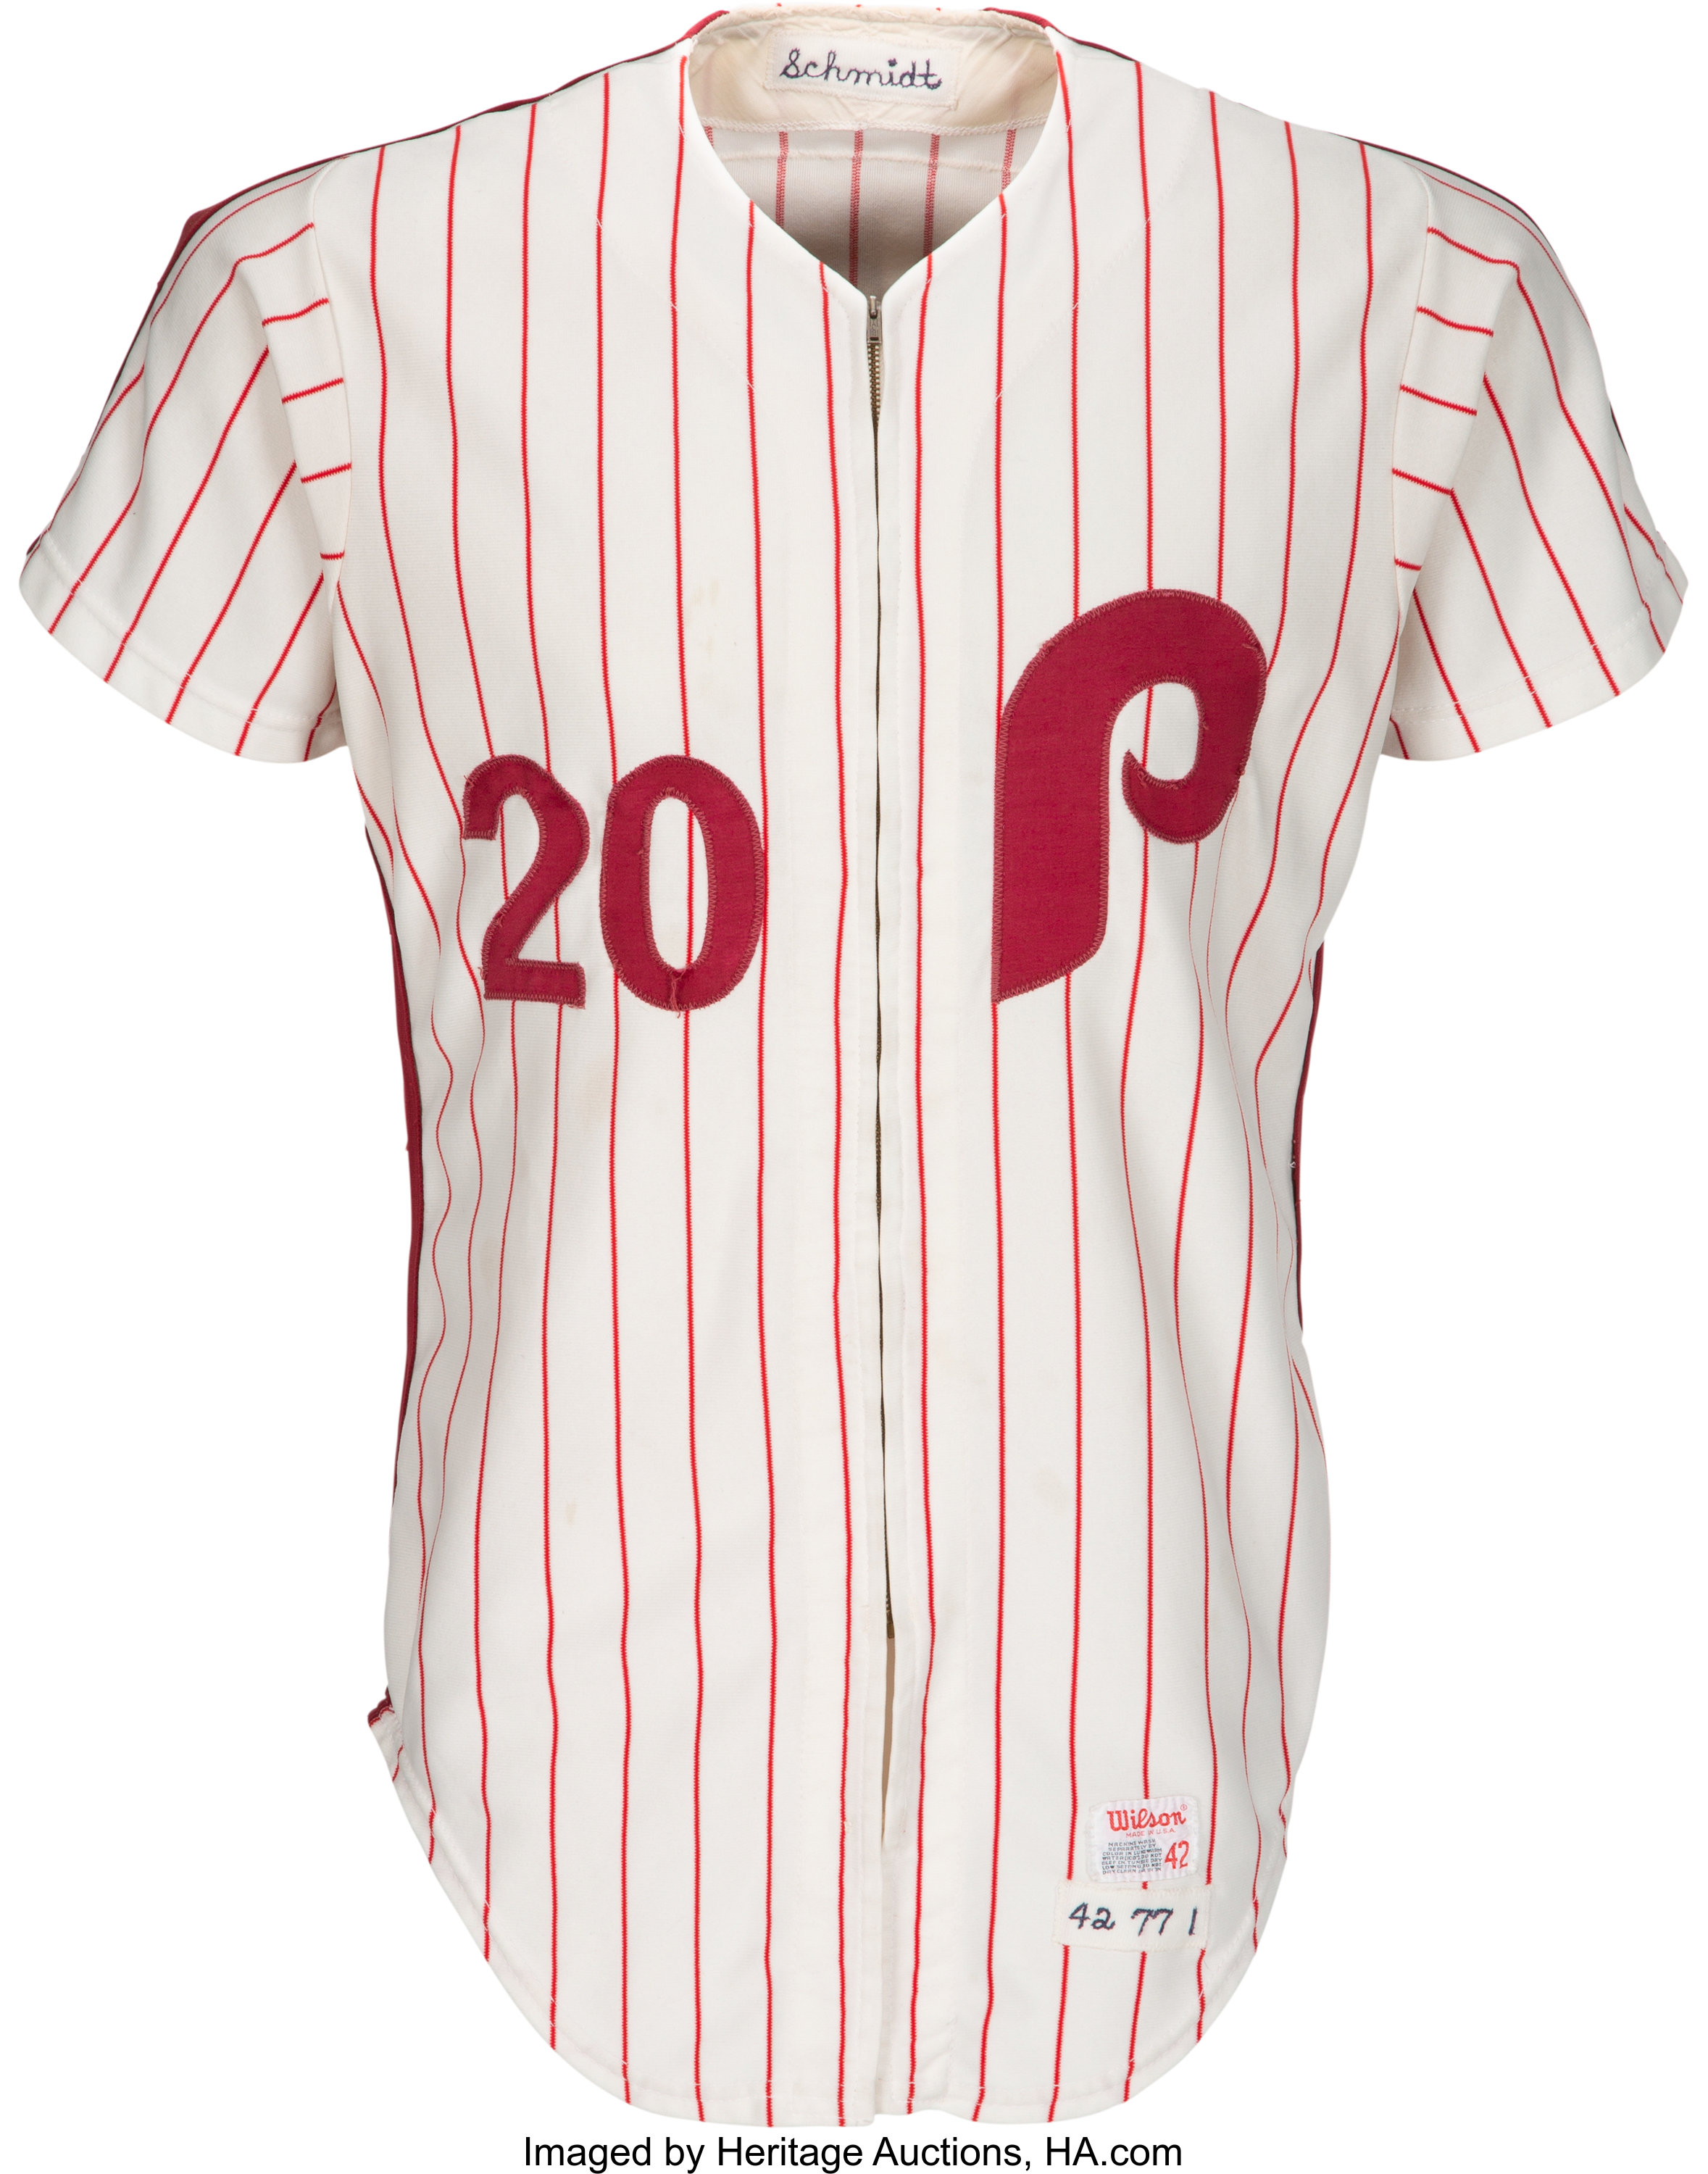 2017-18 Philadelphia Phillies Blank Game Issued Cream Jersey Memorial Day  50 193